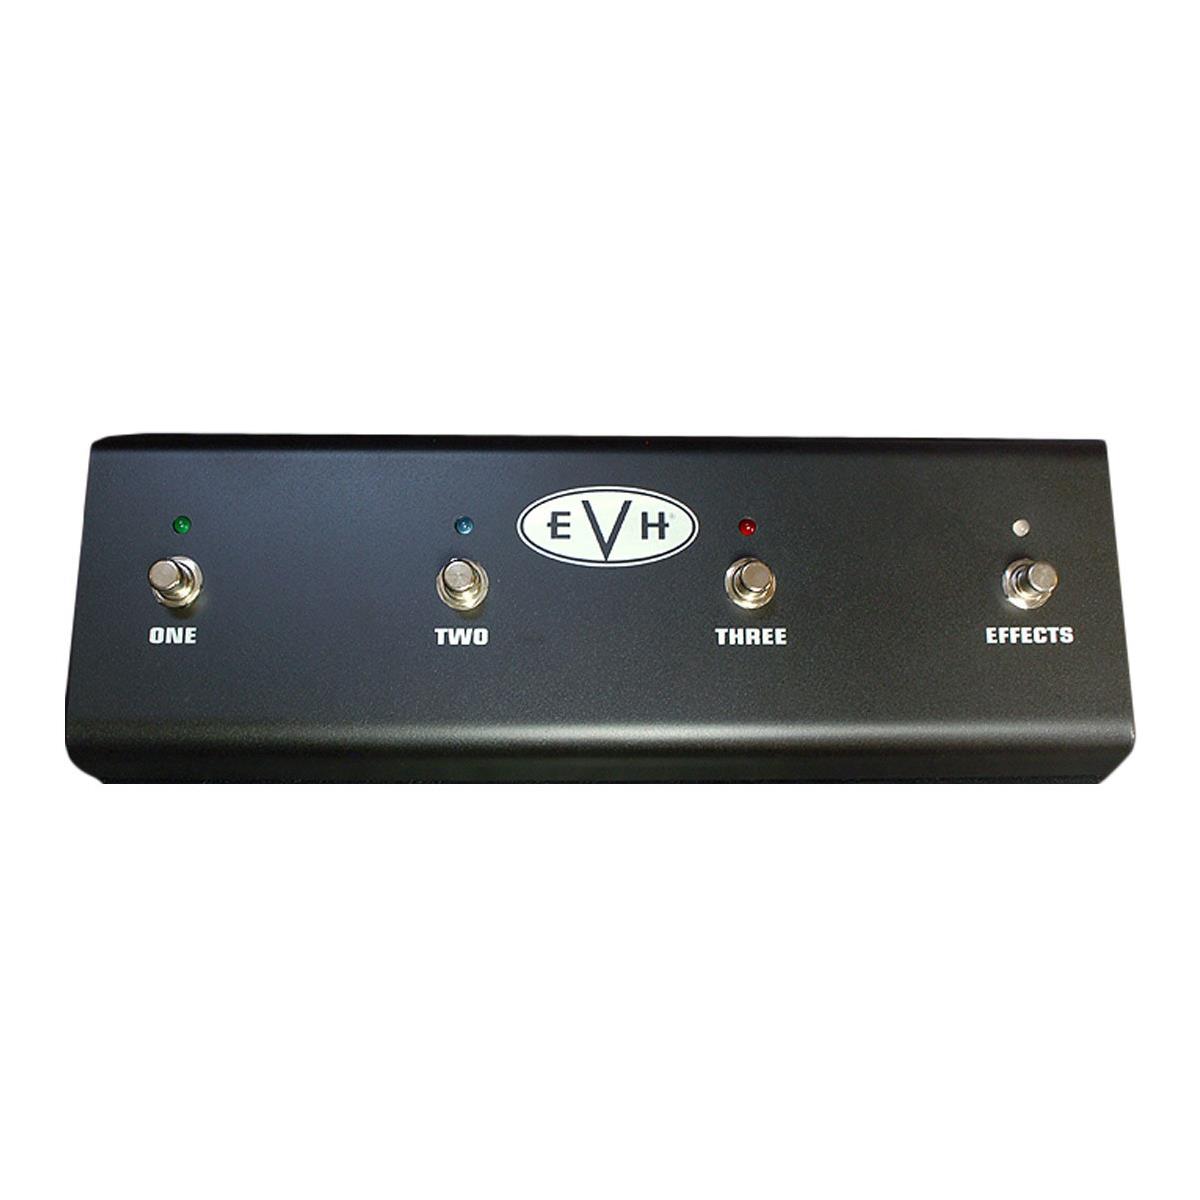 EVH 4 Button 3-channel Footswitch with Cable for 5150III 100W Head The EVH 4 Button 3-channel Footswitch with Cable is specially designed for 5150III 100W Head.